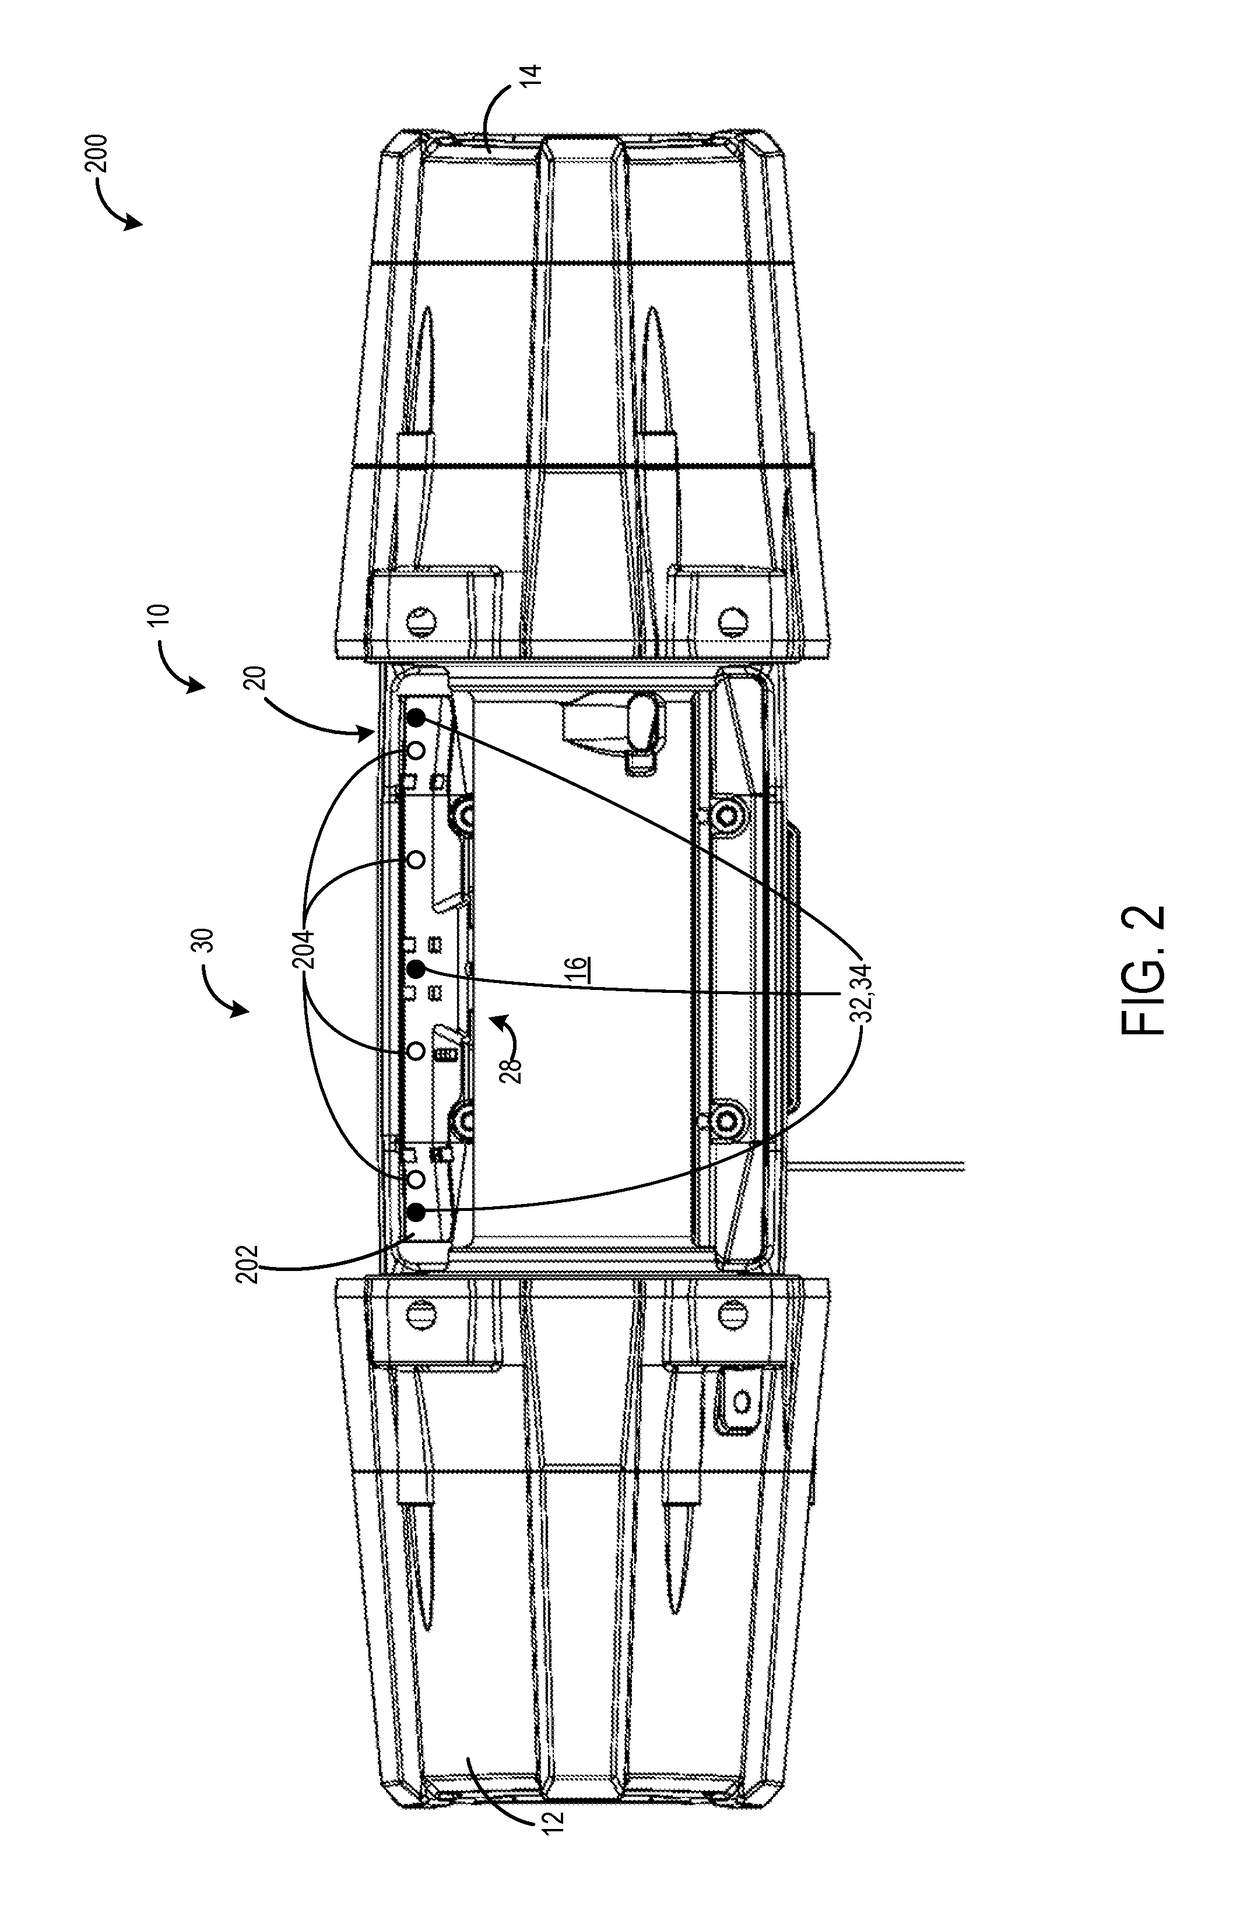 Lighting and sensory system for a pulling tool